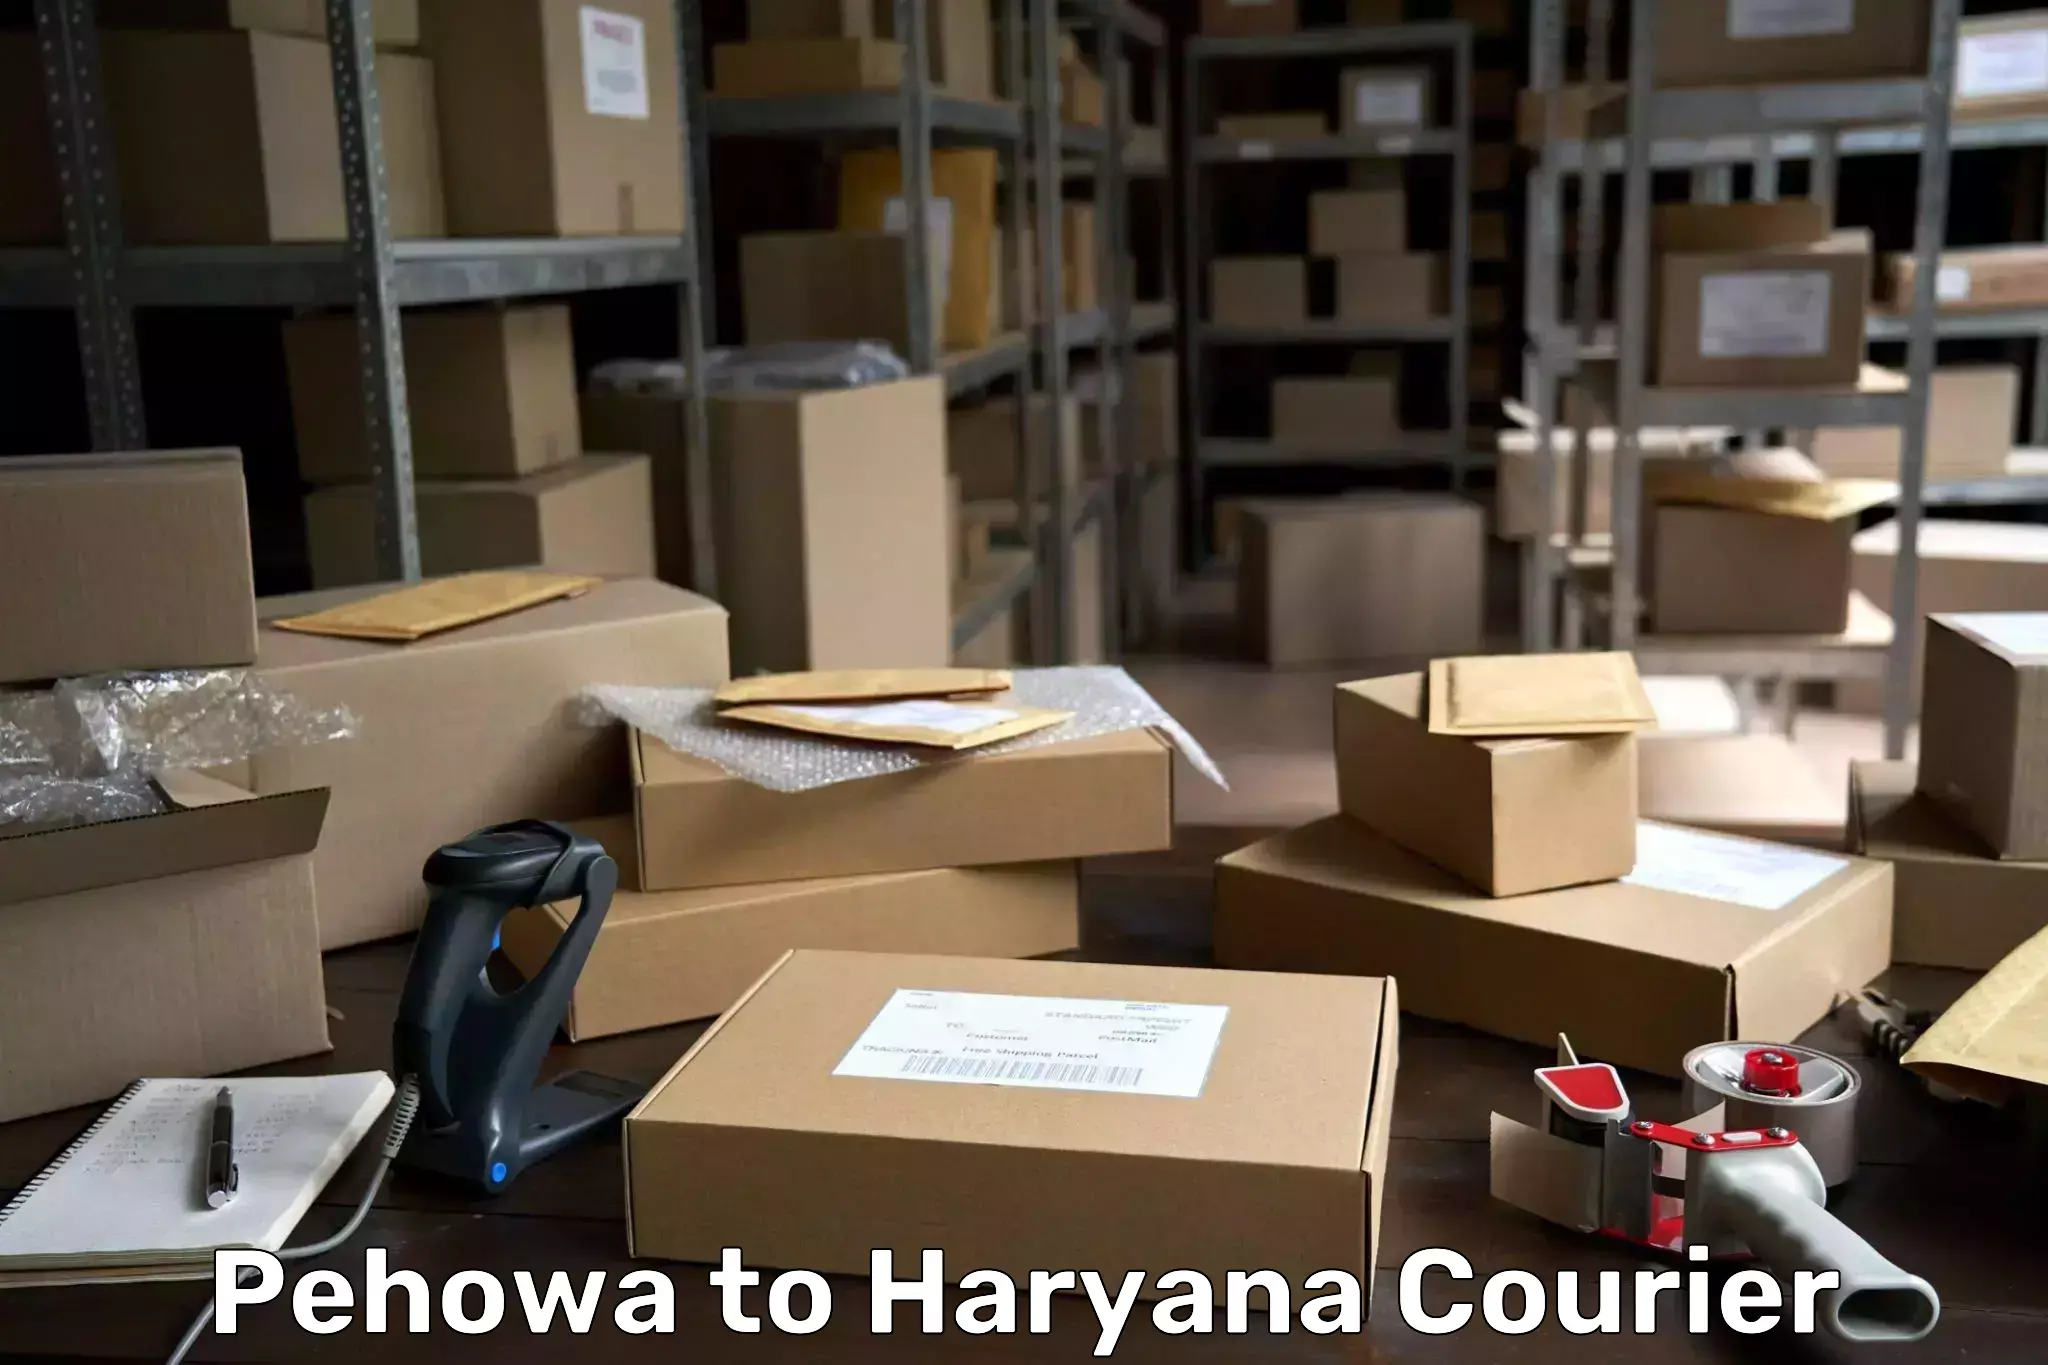 24/7 courier service Pehowa to Chaudhary Charan Singh Haryana Agricultural University Hisar